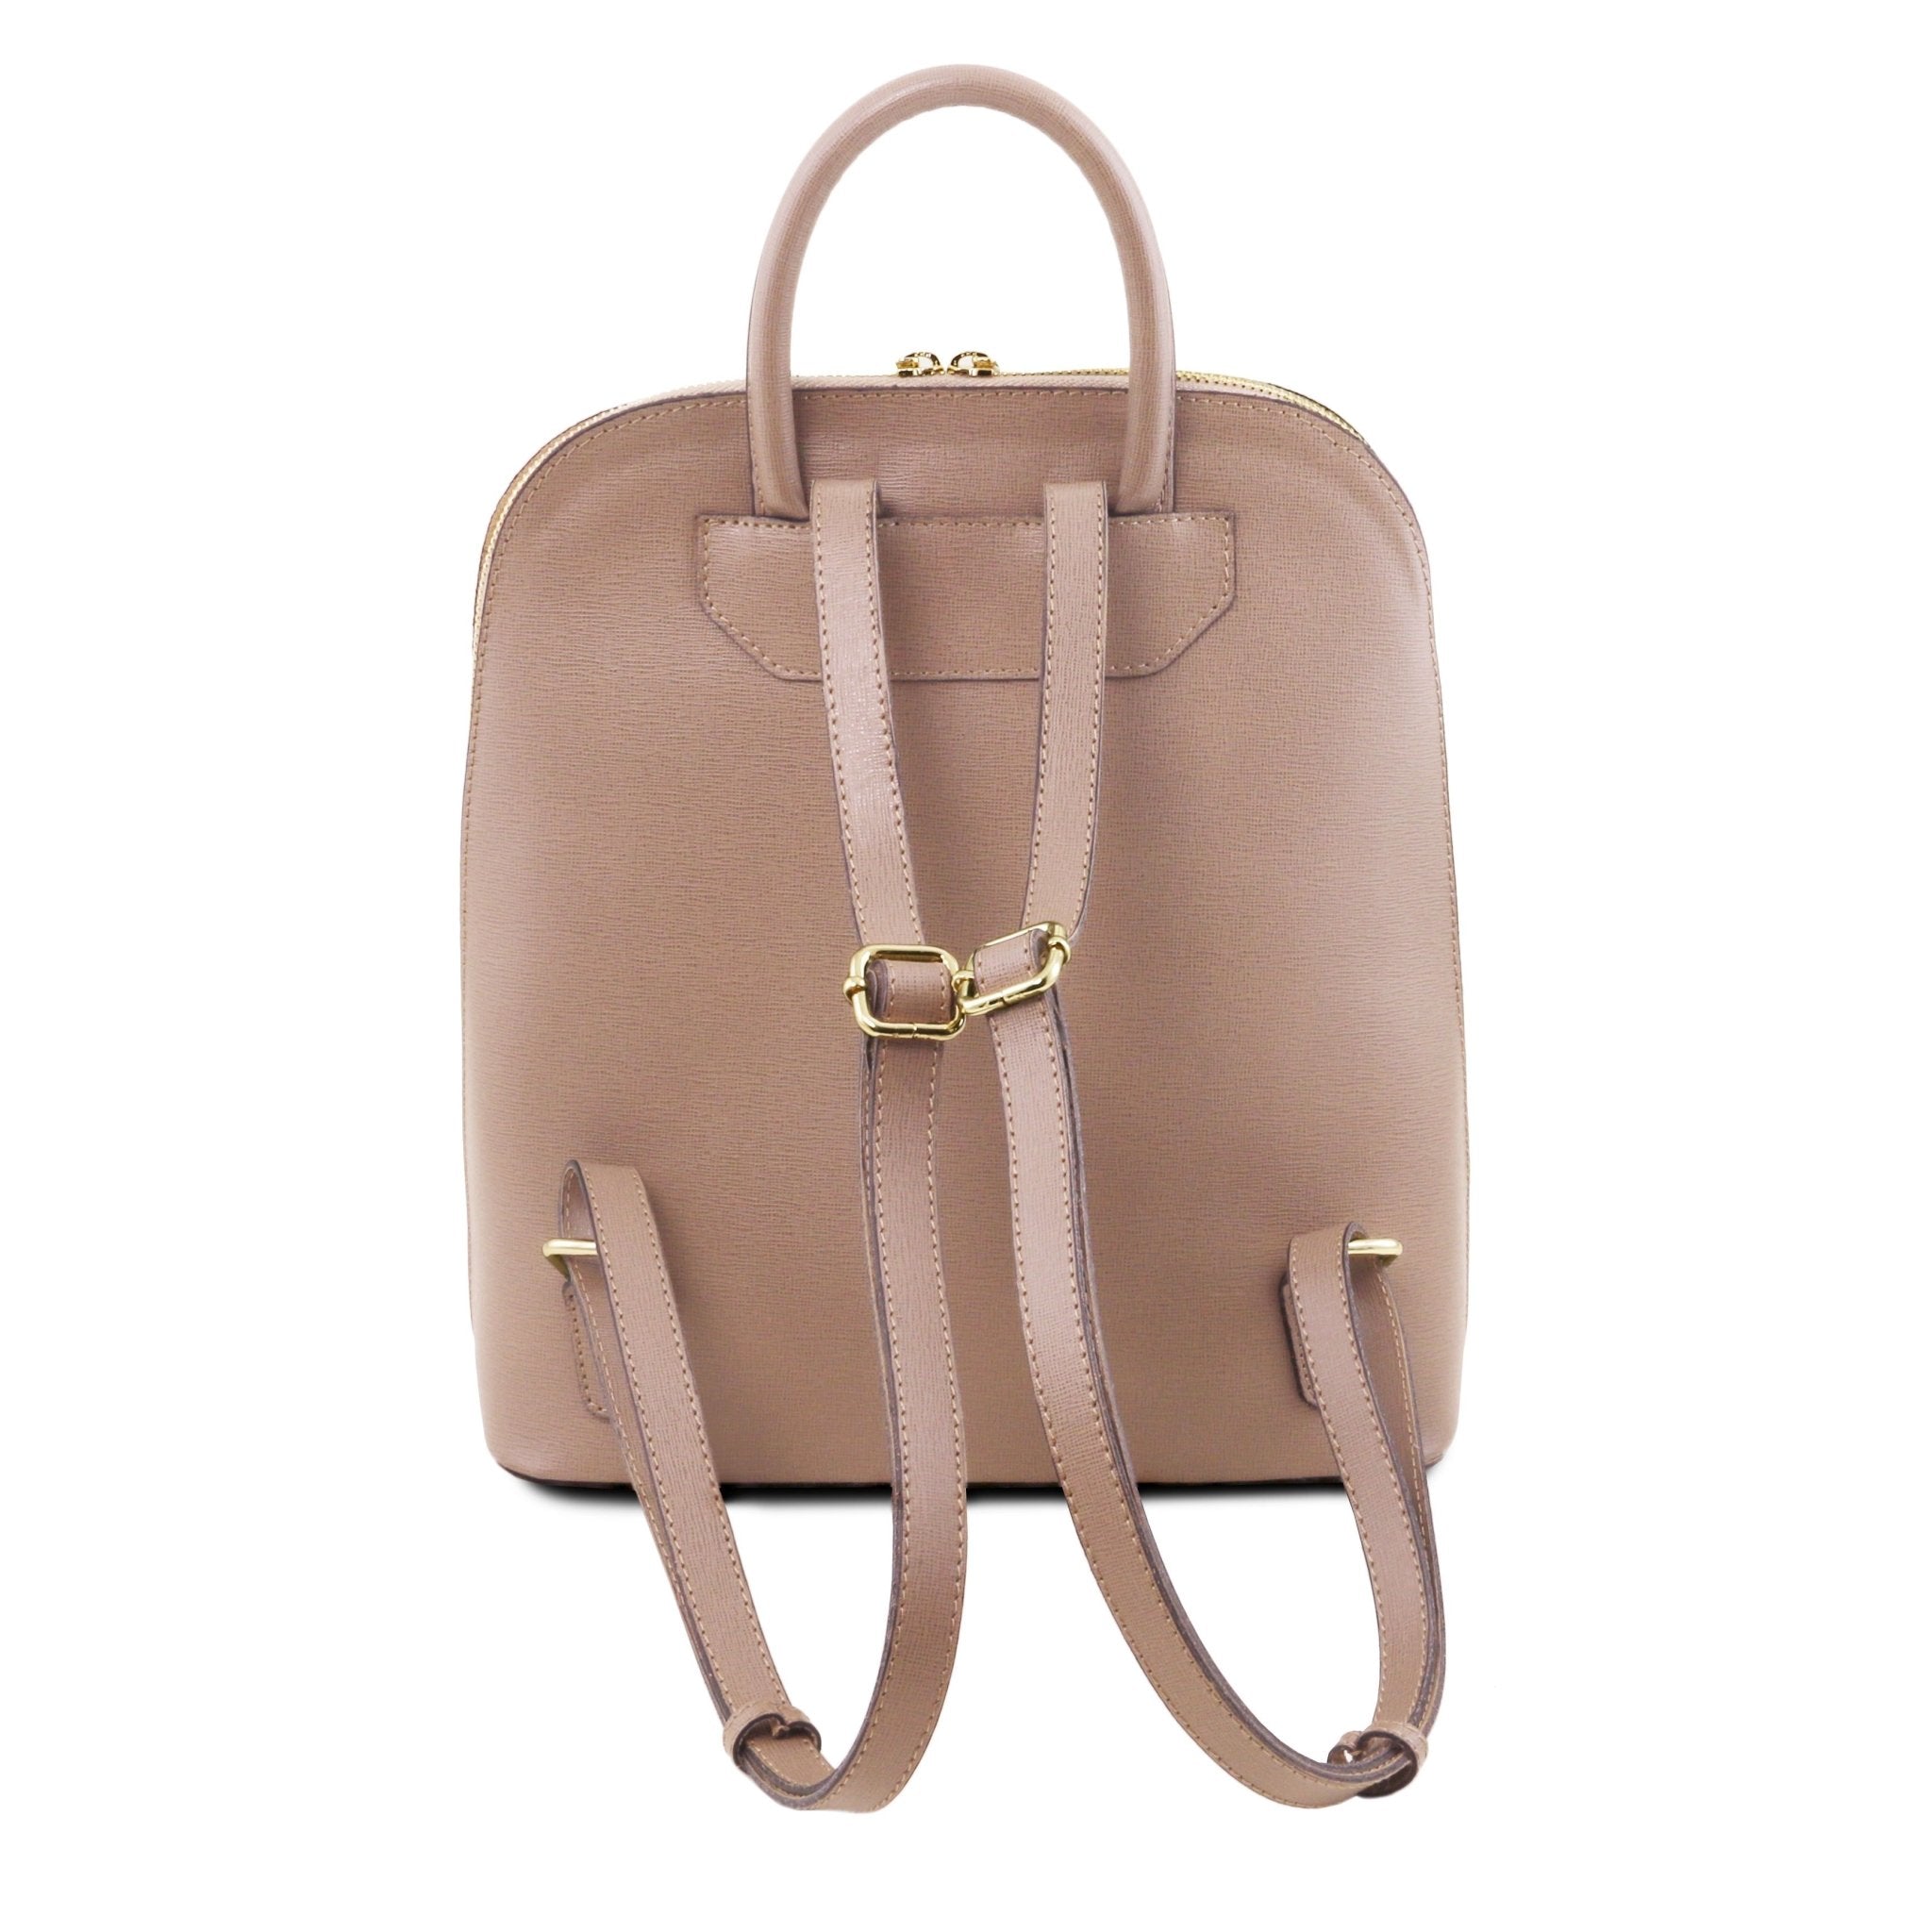 TL Bag Saffiano Leather Backpack - L'Atelier Global